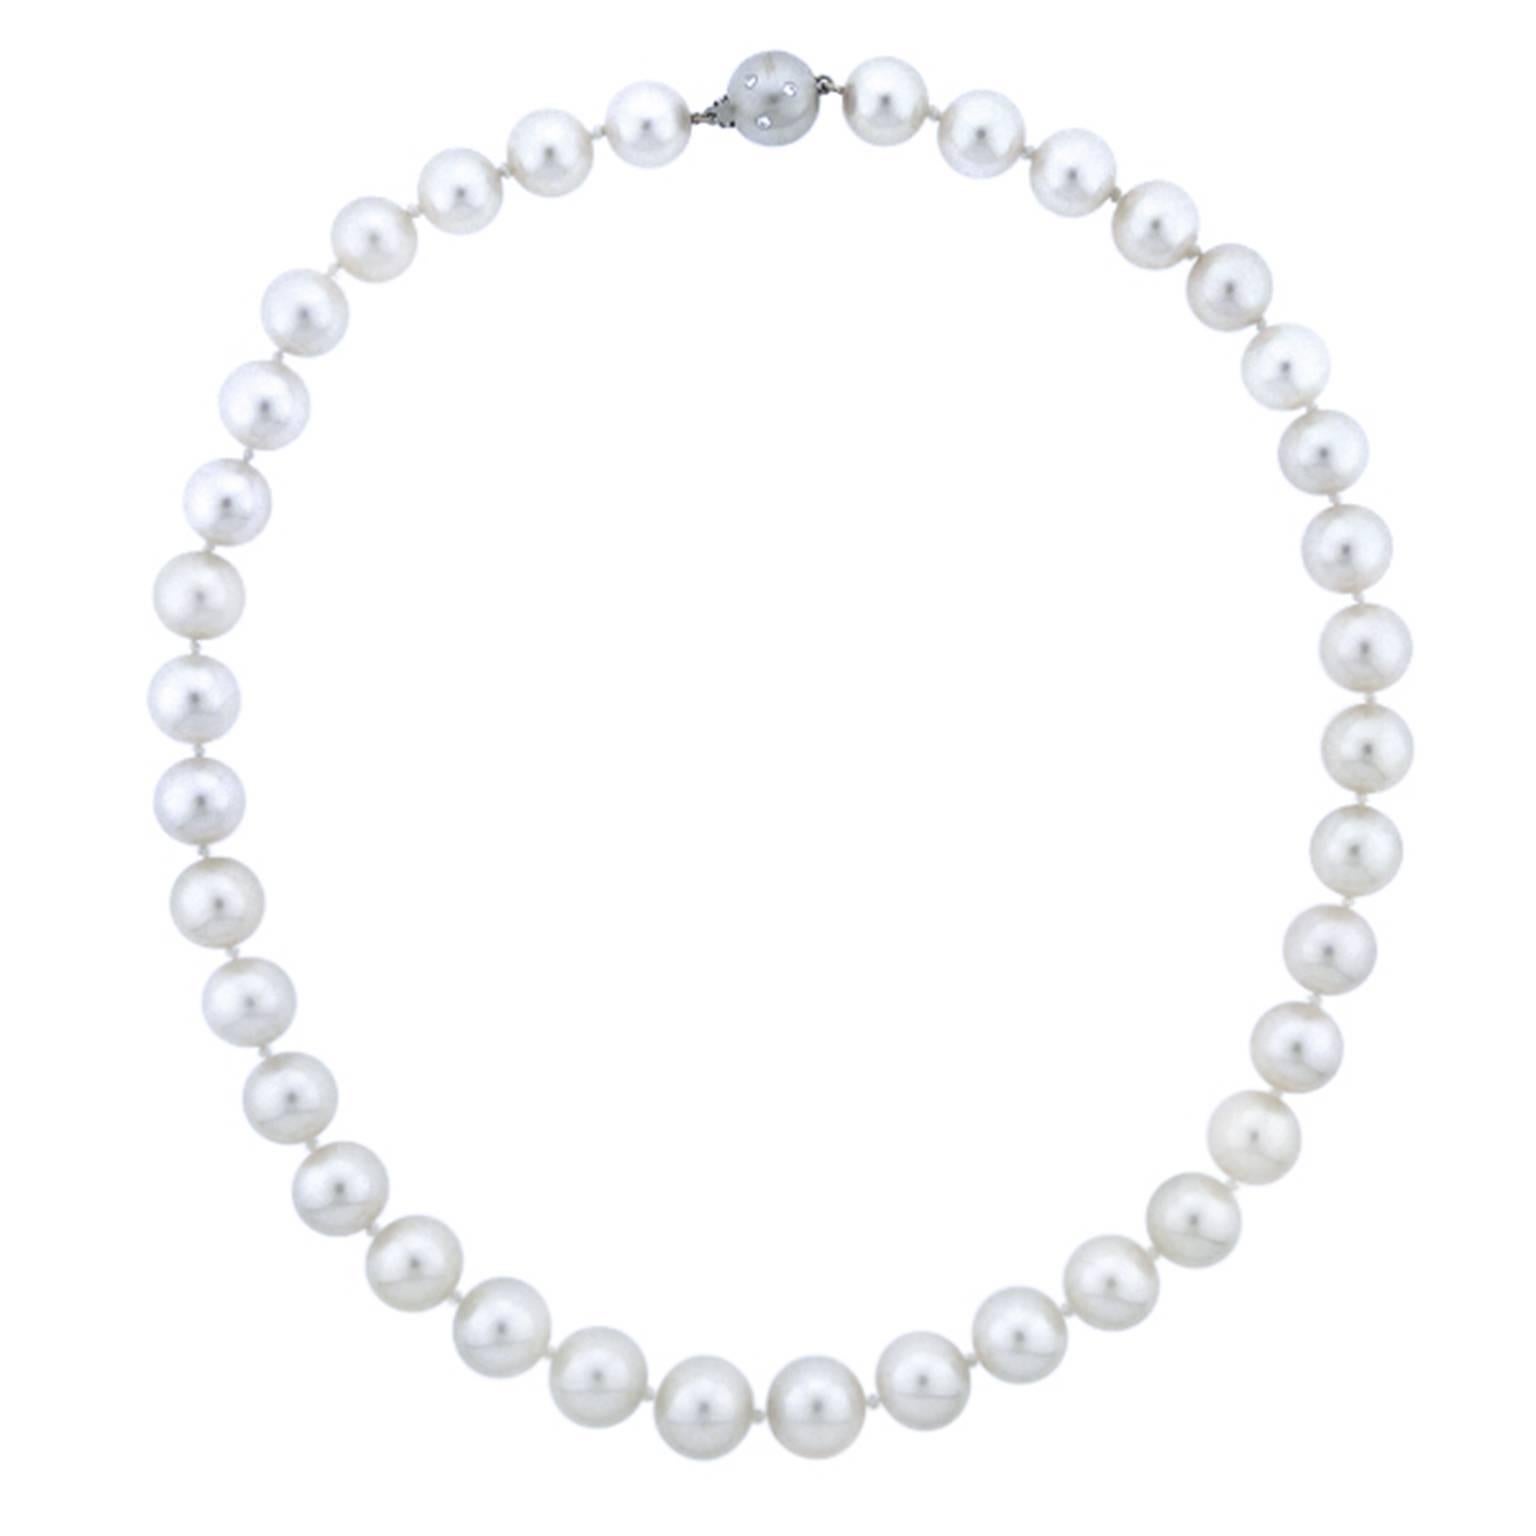 South Sea pearl necklaces of this quality in a uniform size are extremely rare. To economize, most graduate from smaller pearls in the back to larger pearls in the front. This amazing 18